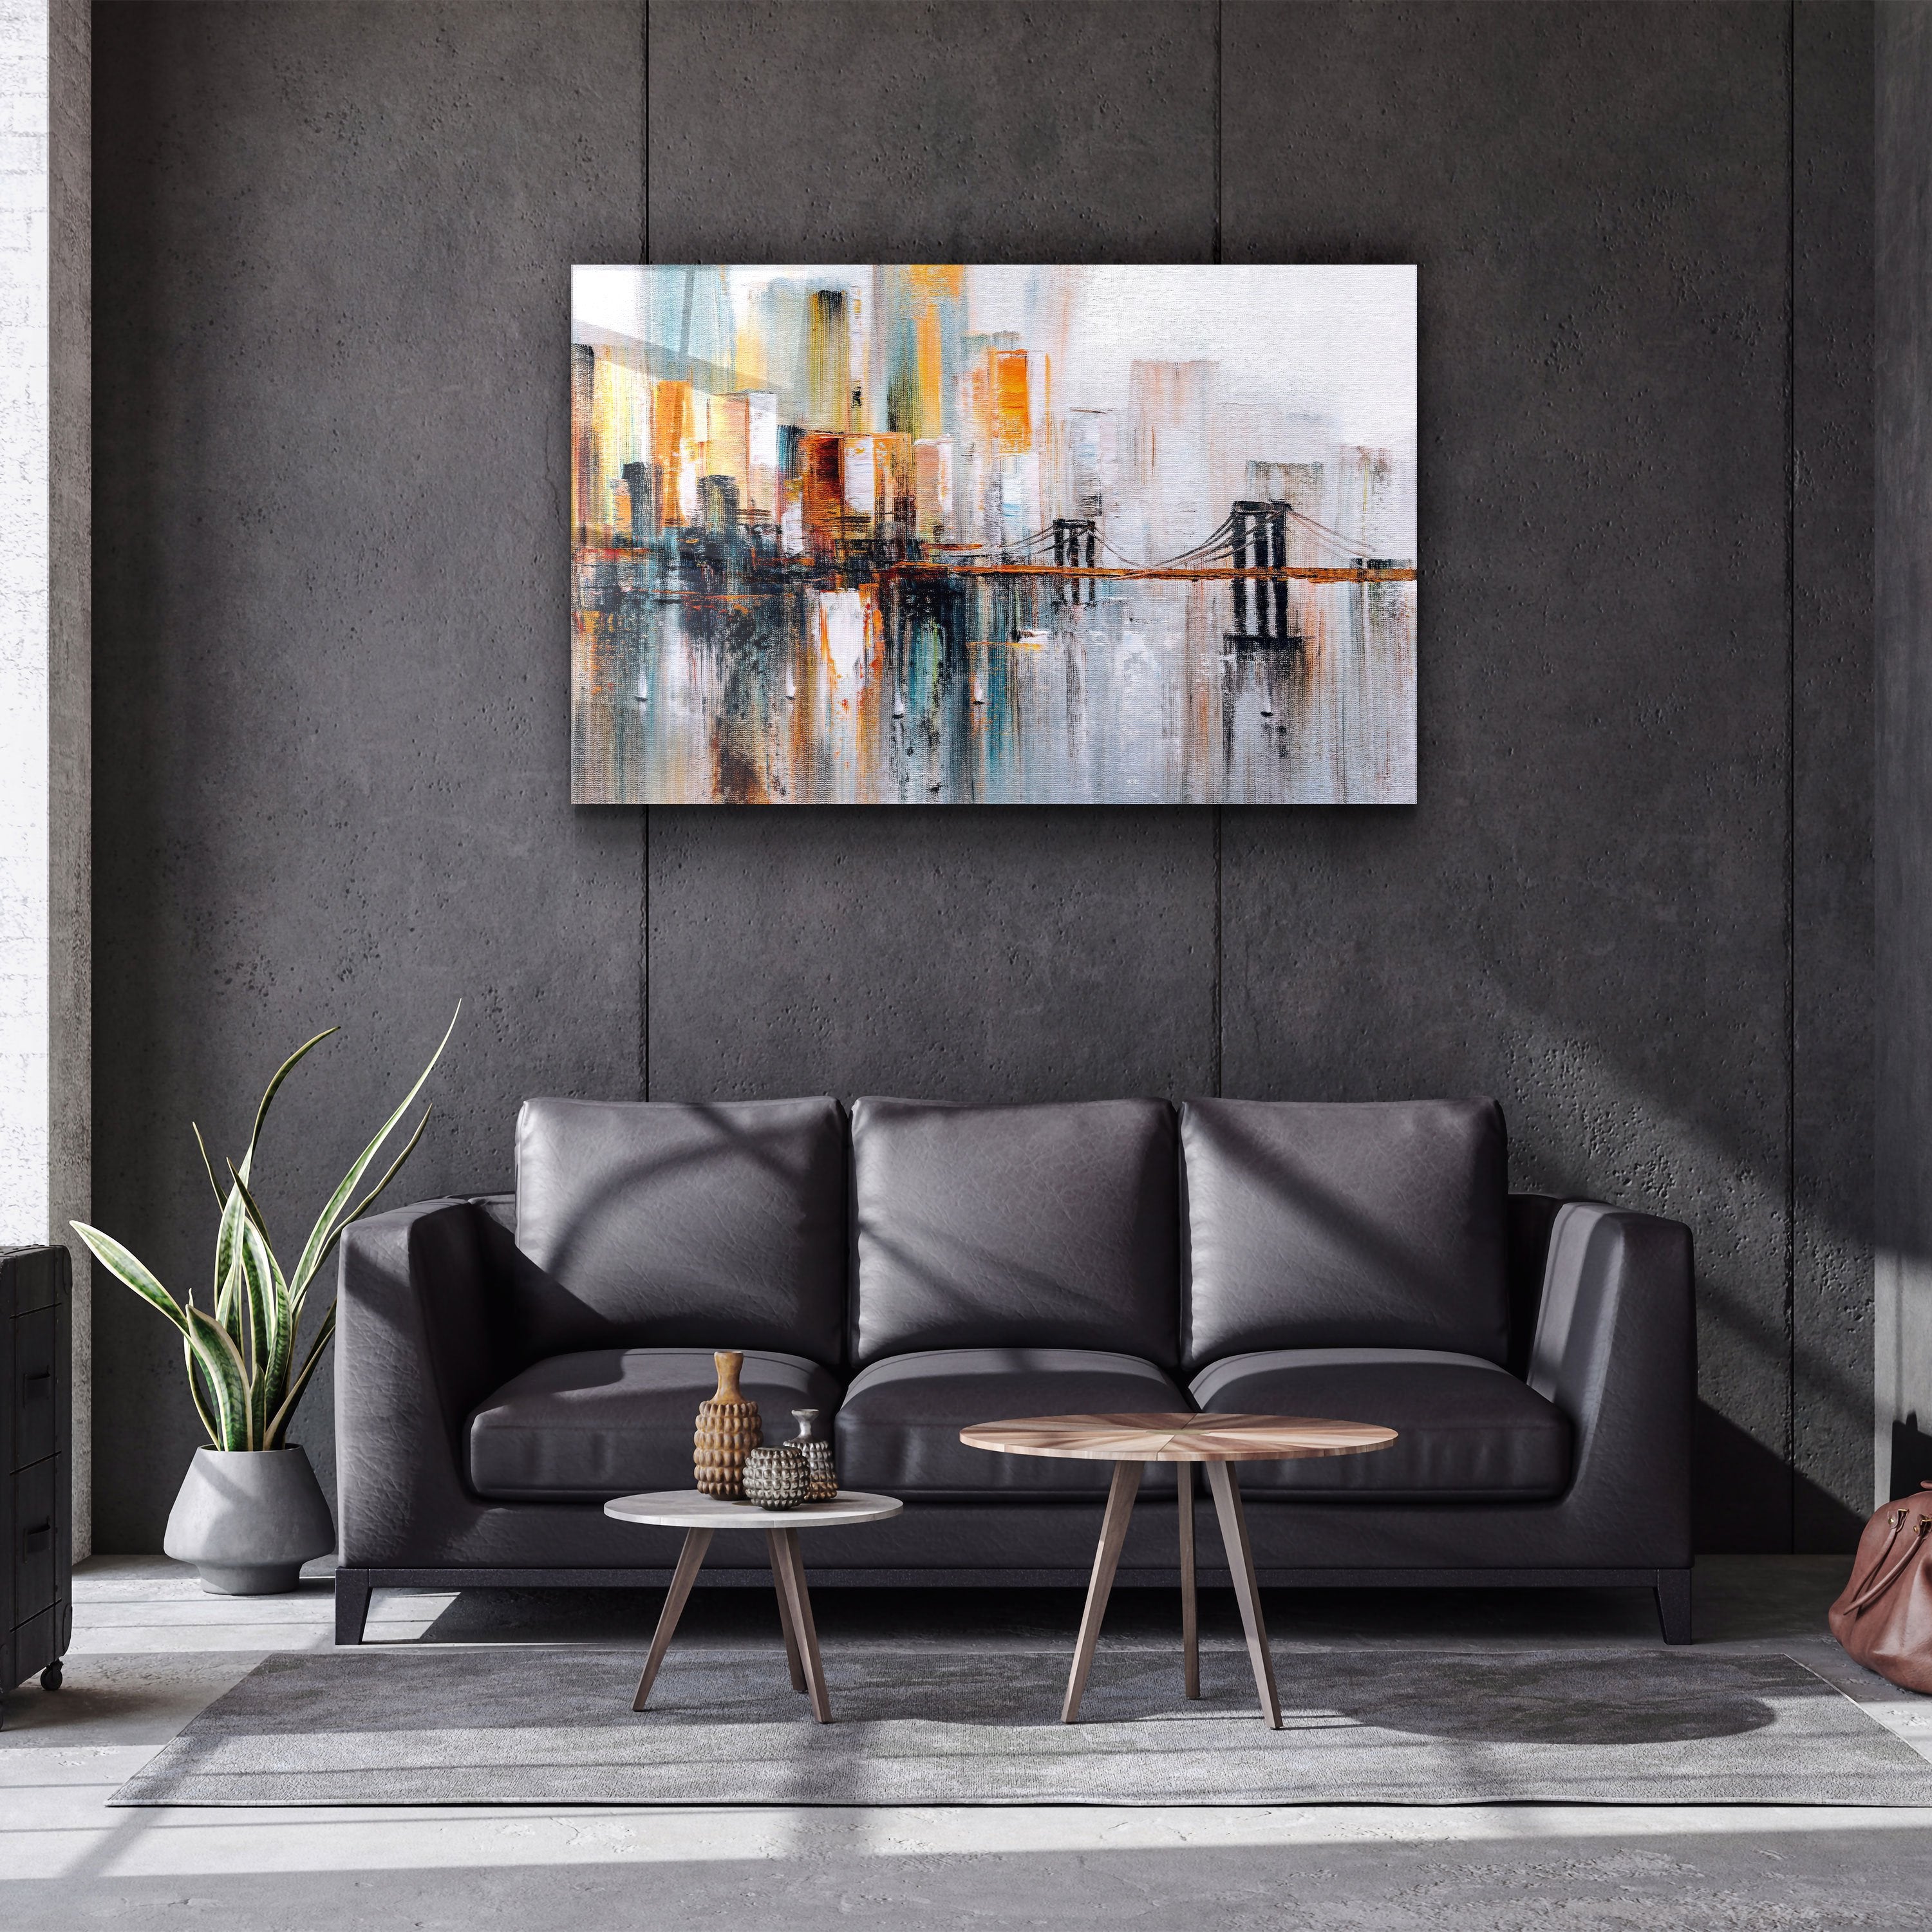 ・"Abstract City View"・Glass Wall Art